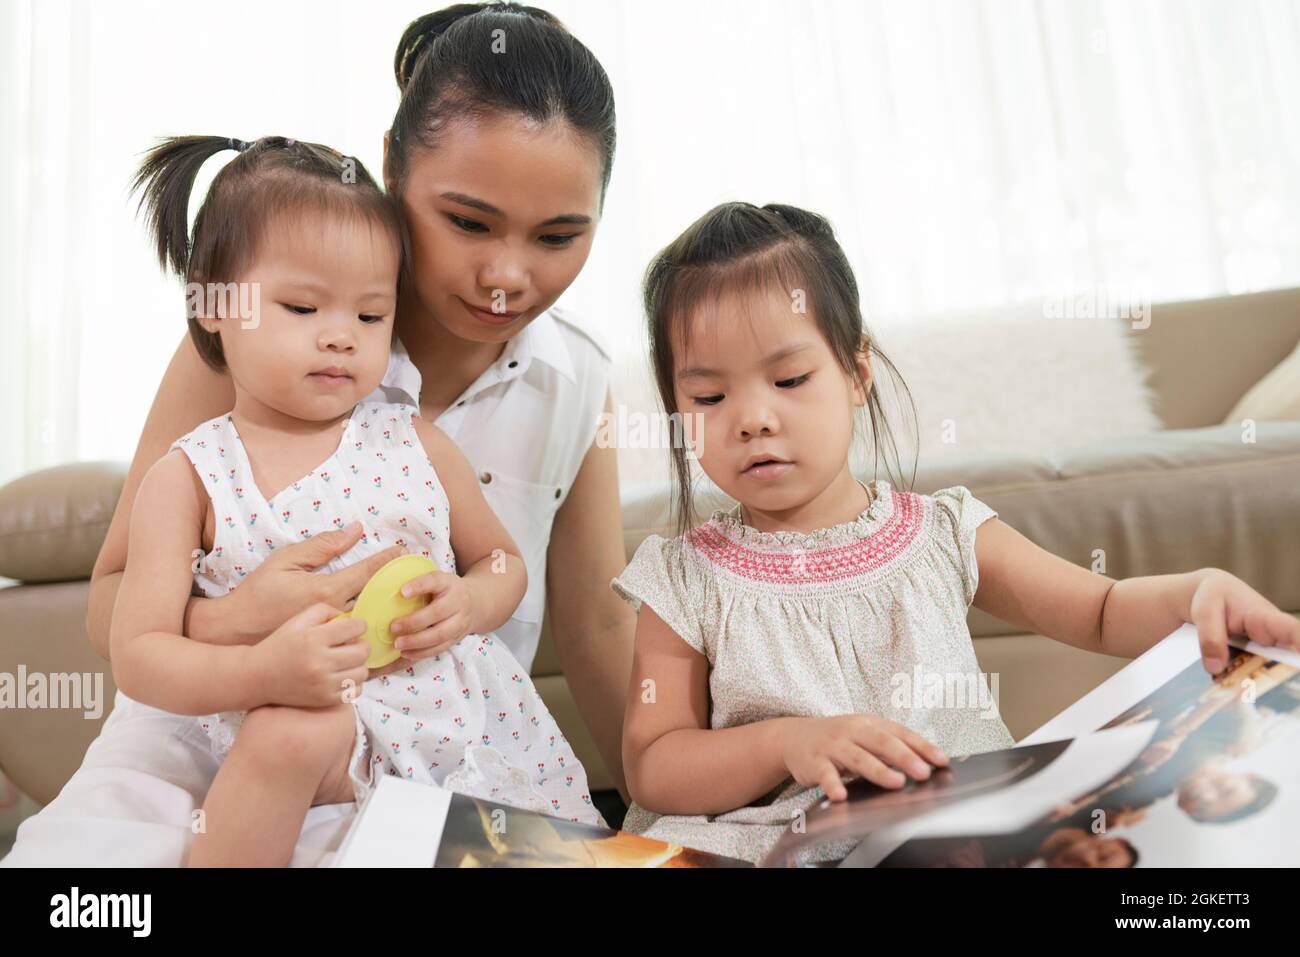 Curious little girls and their mother looking at book of printed photos Stock Photo